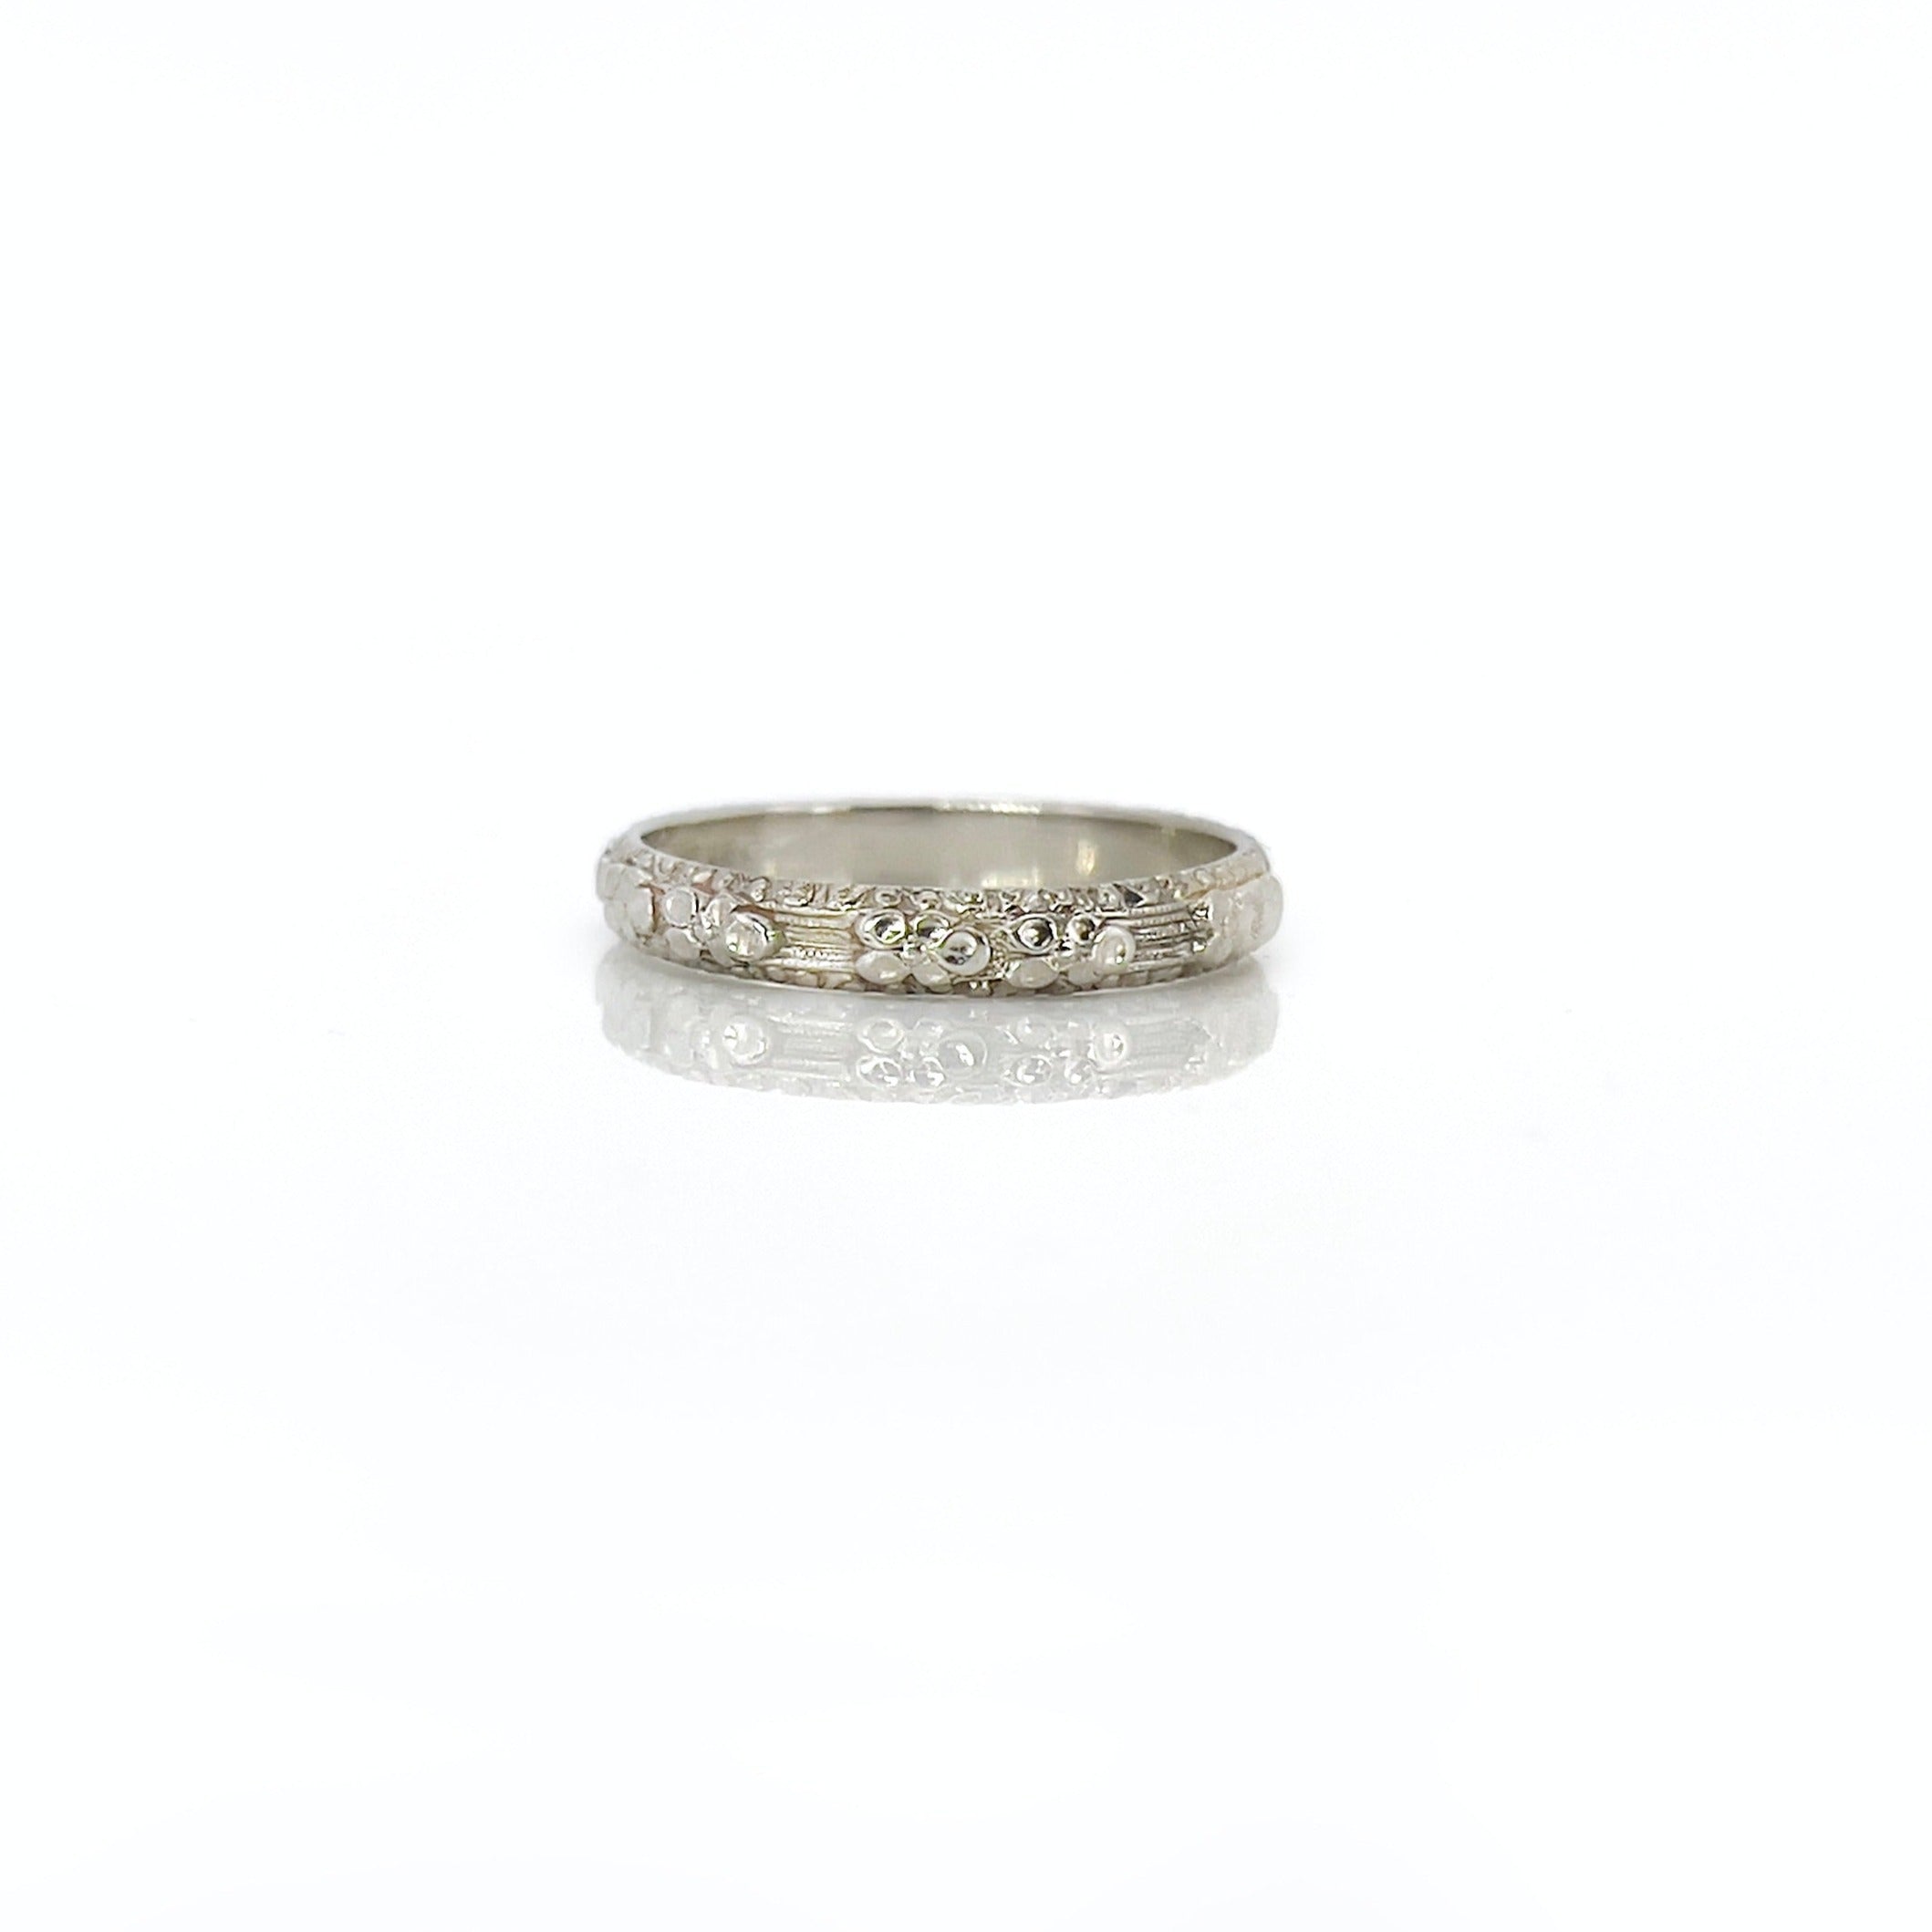 White Gold Floral Band, L’Amour, Size 5.25